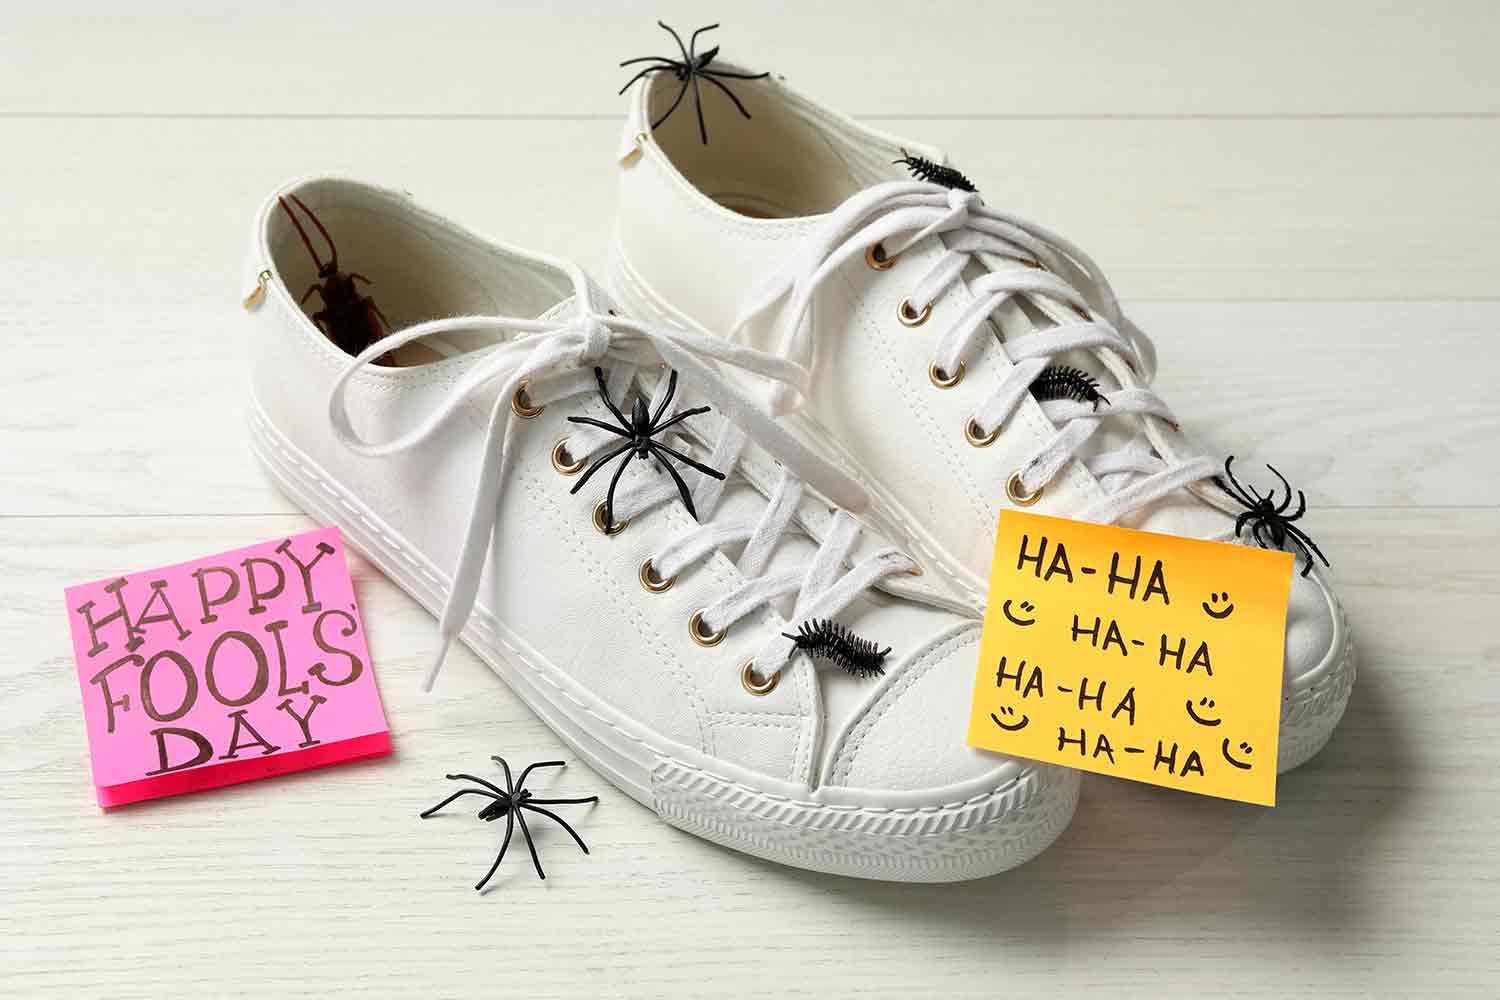 Shoes with fake spiders, bugs and Happy Fools' Day note on white wooden table